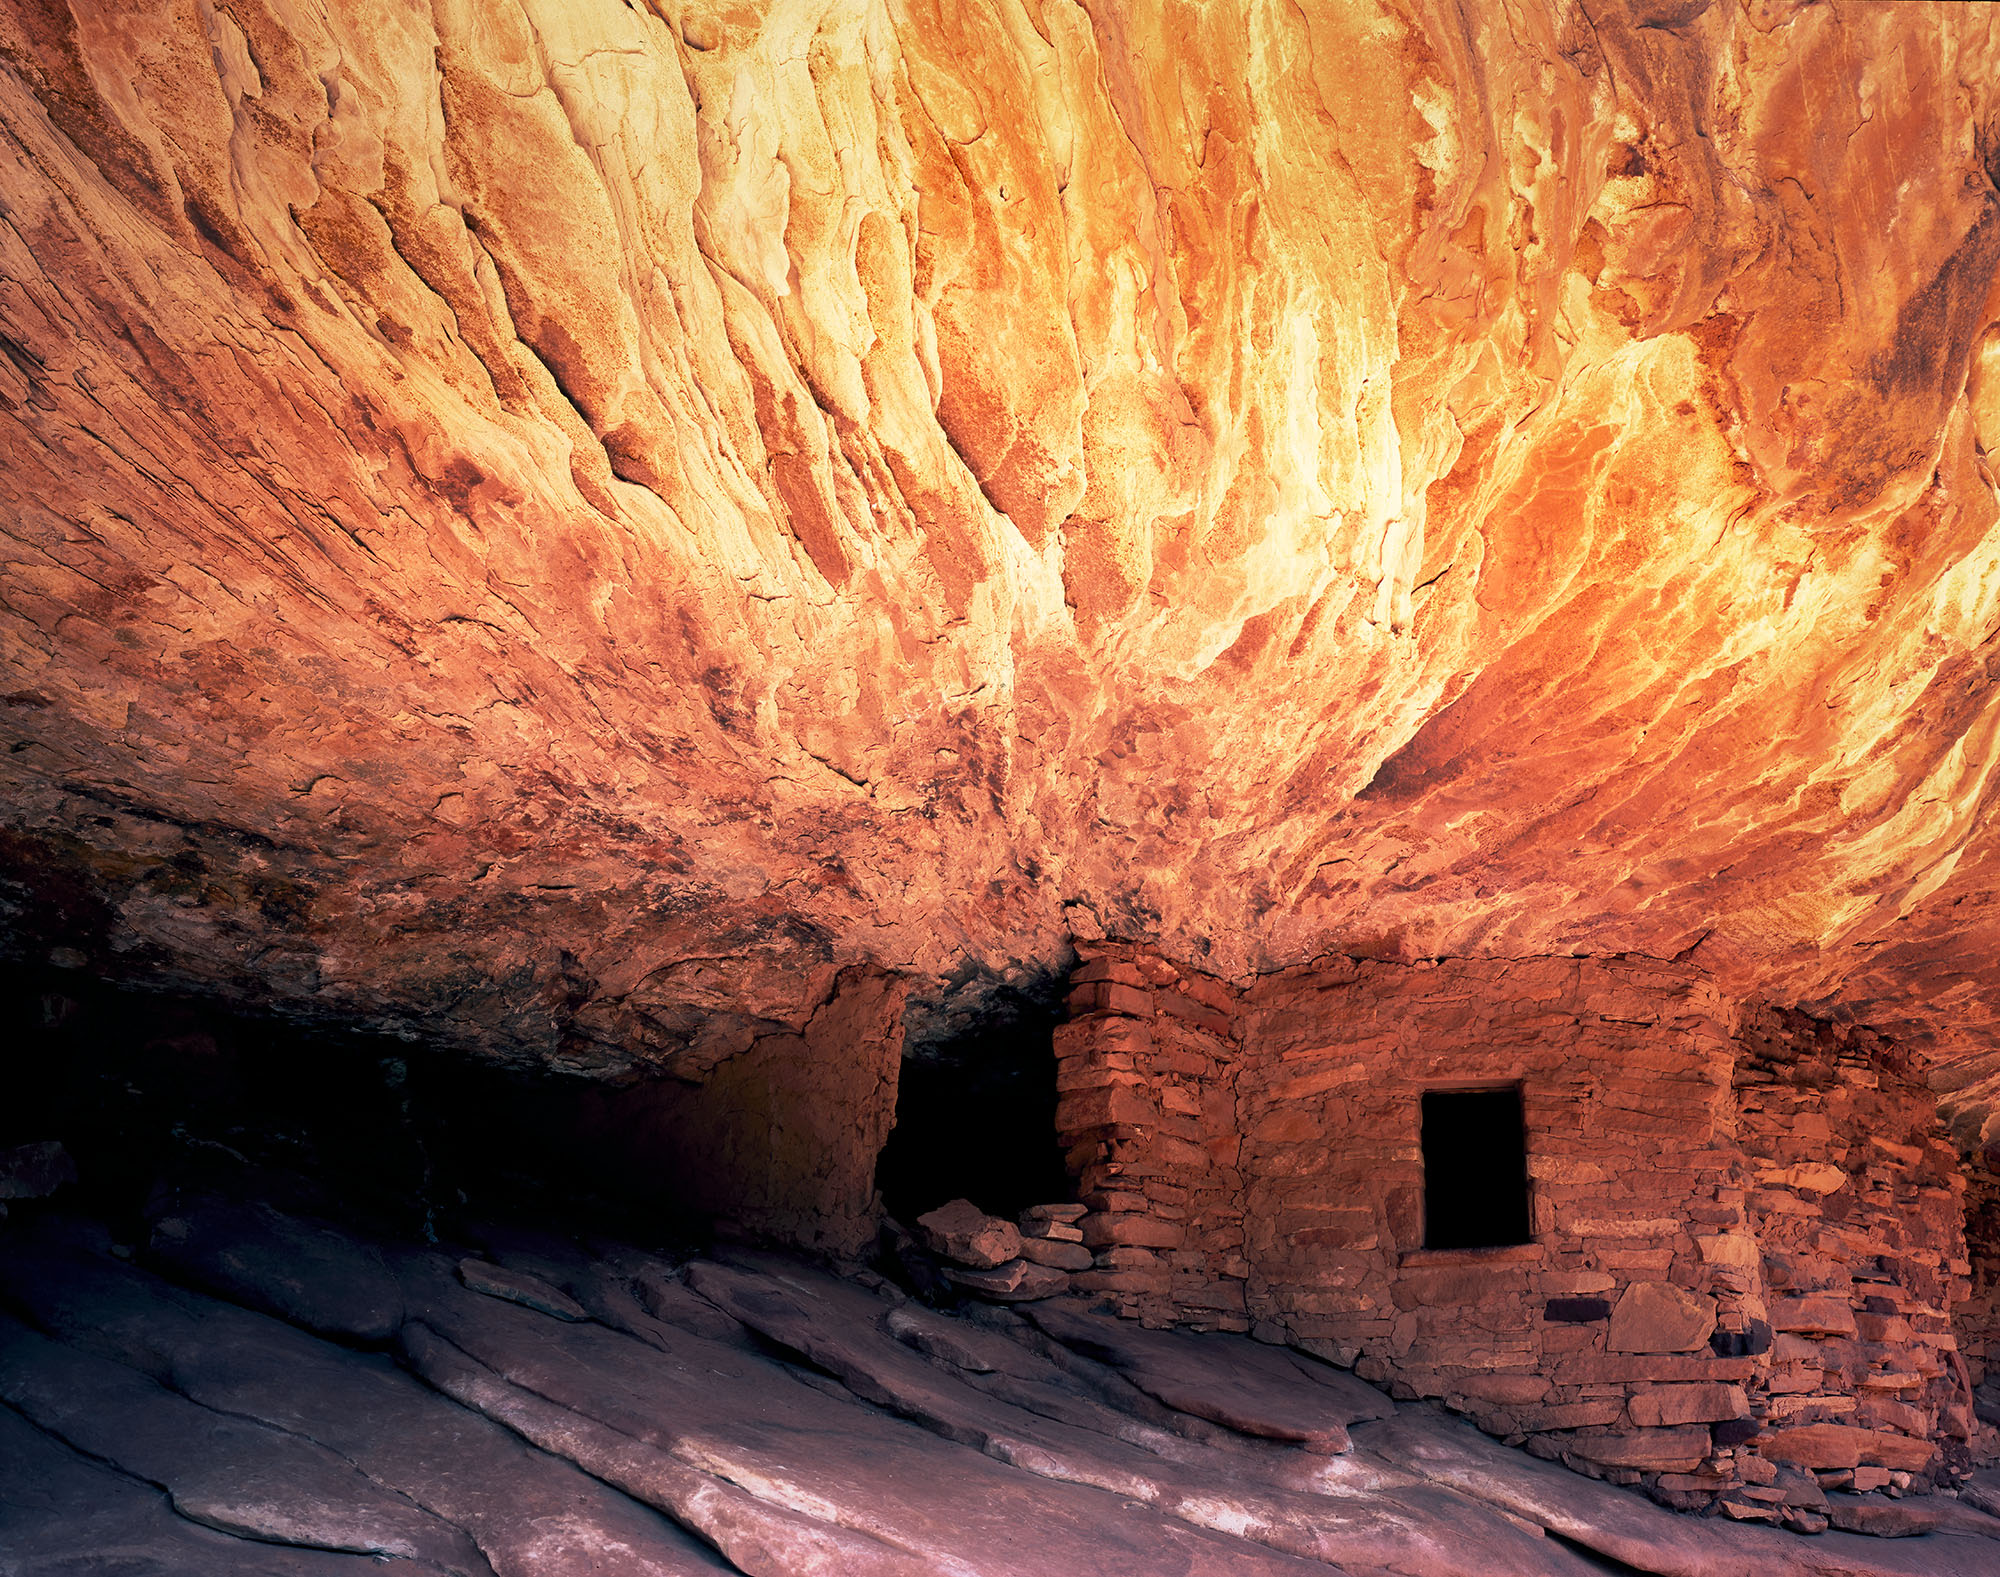 Captured with my Ebony SV45Te View Camera on Fuji Velvia film, this image showcases the Native American ruins of Fire Roof Ruin...